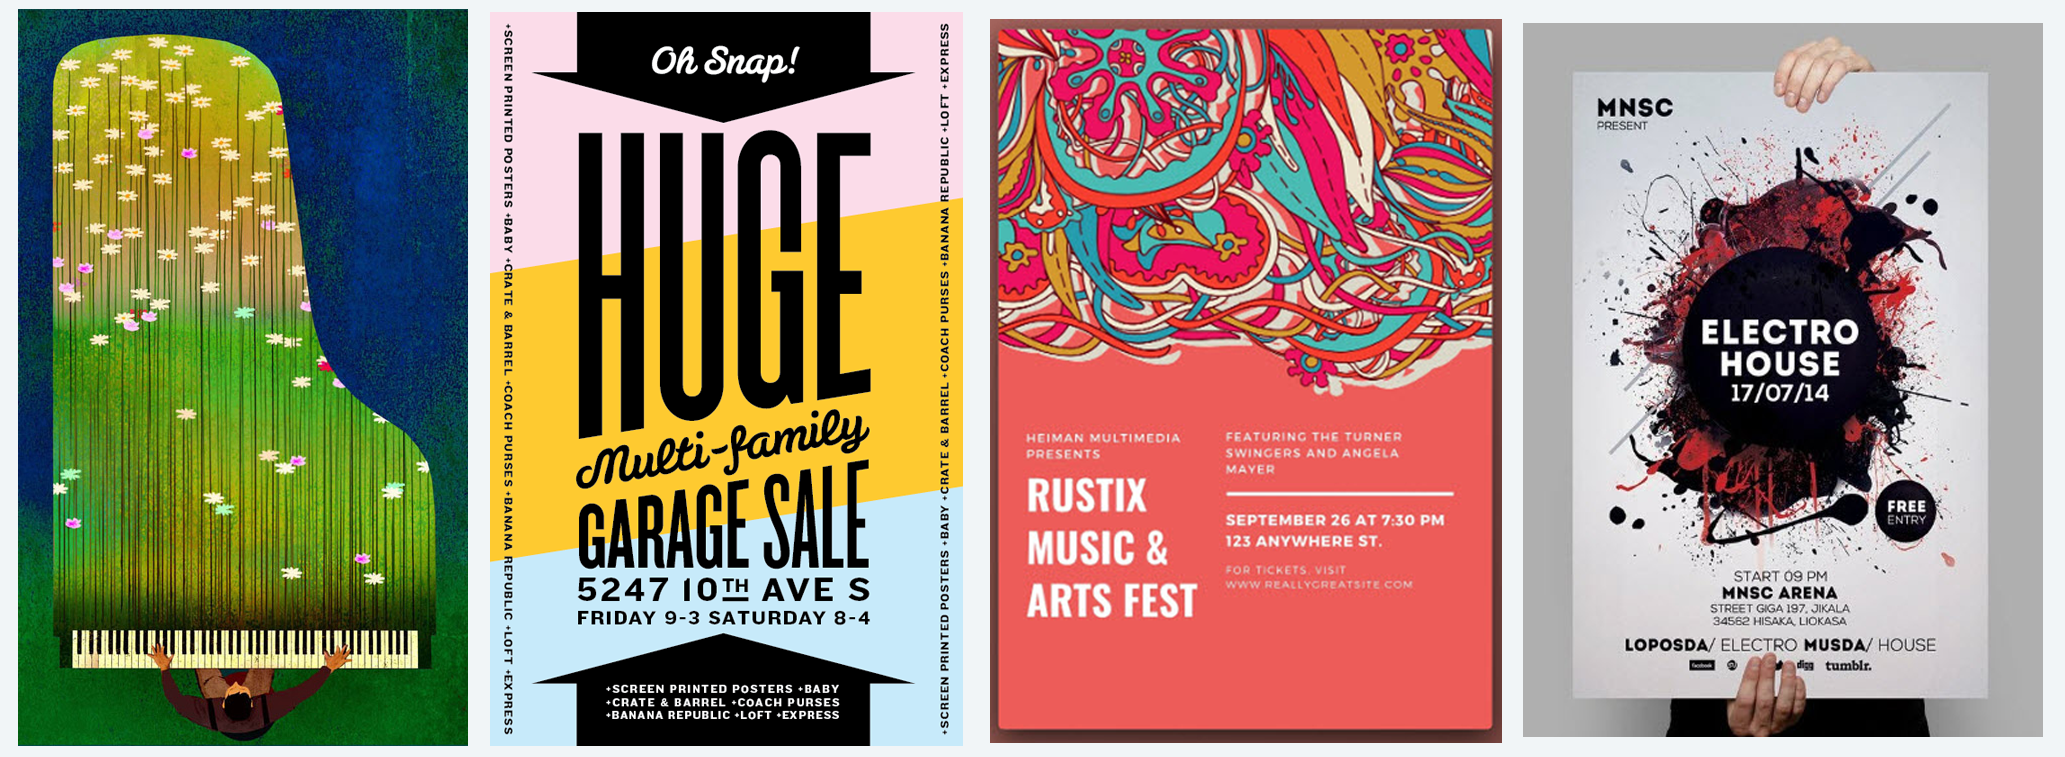 CREATIVE POSTERS THAT STAND OUT AND ATTRACT CUSTOMERS